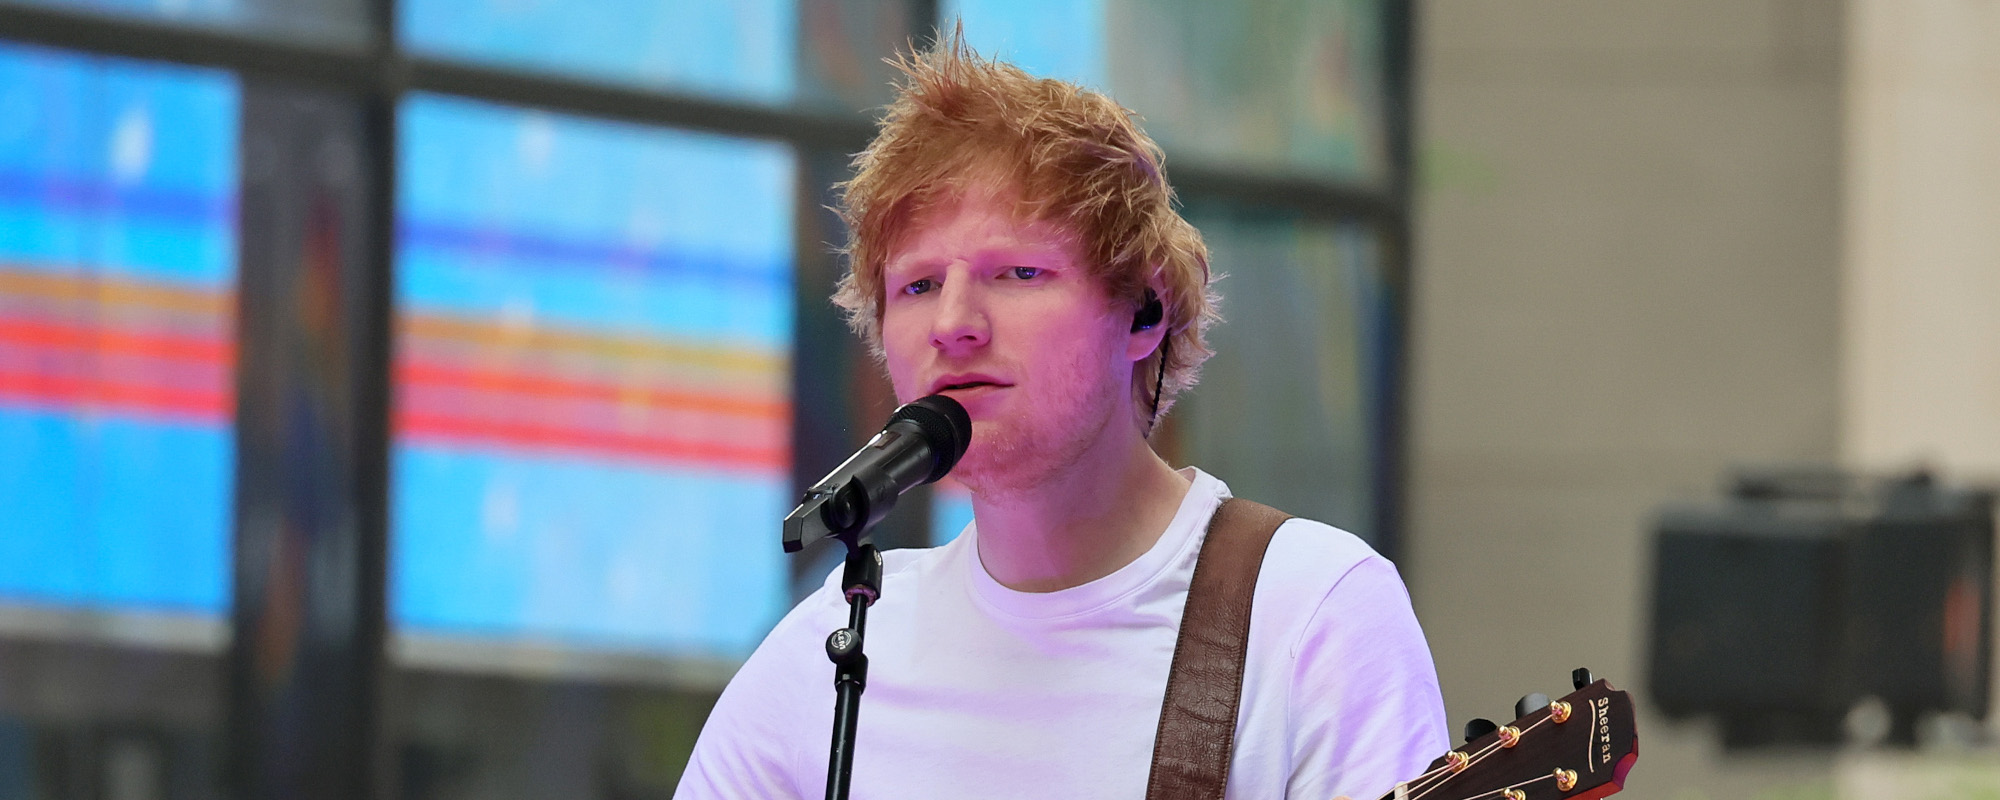 The Meaning Behind “Shape of You” by Ed Sheeran and Why He Thought Someone Else Should Sing It